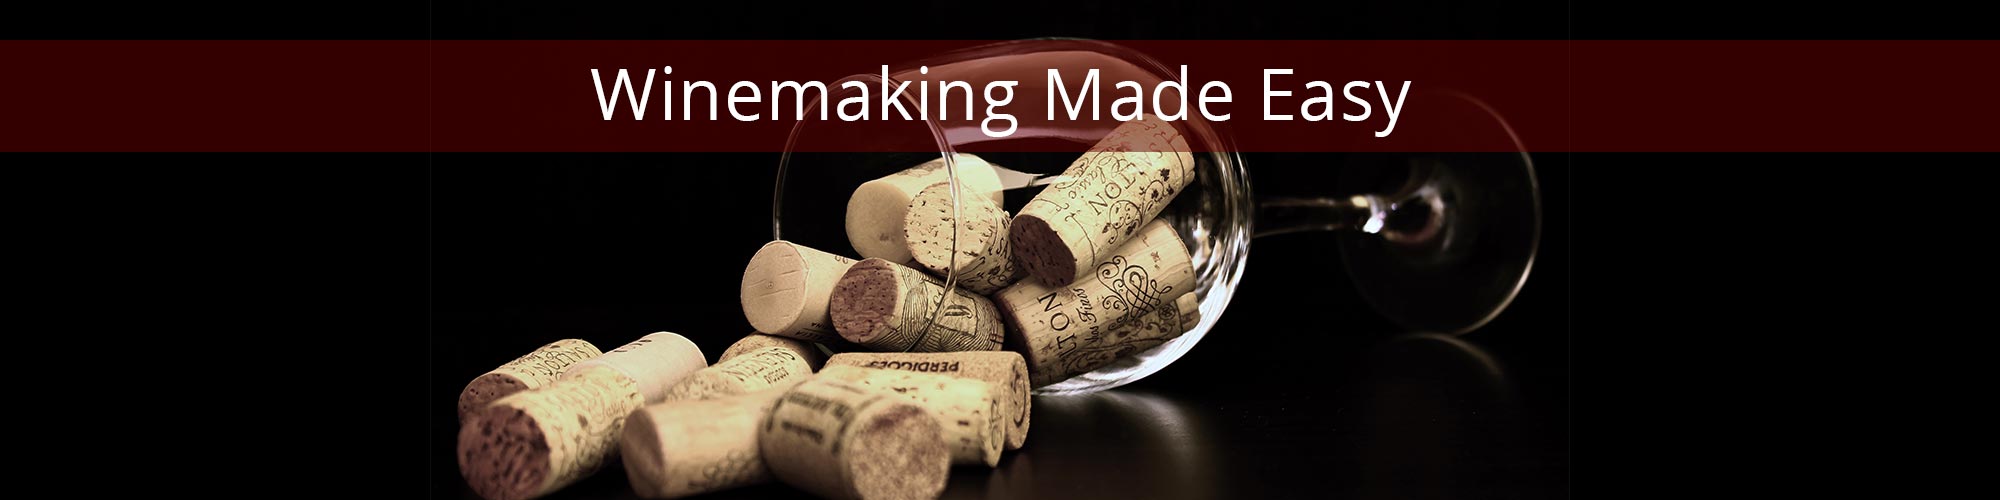 1Winemaking made easy